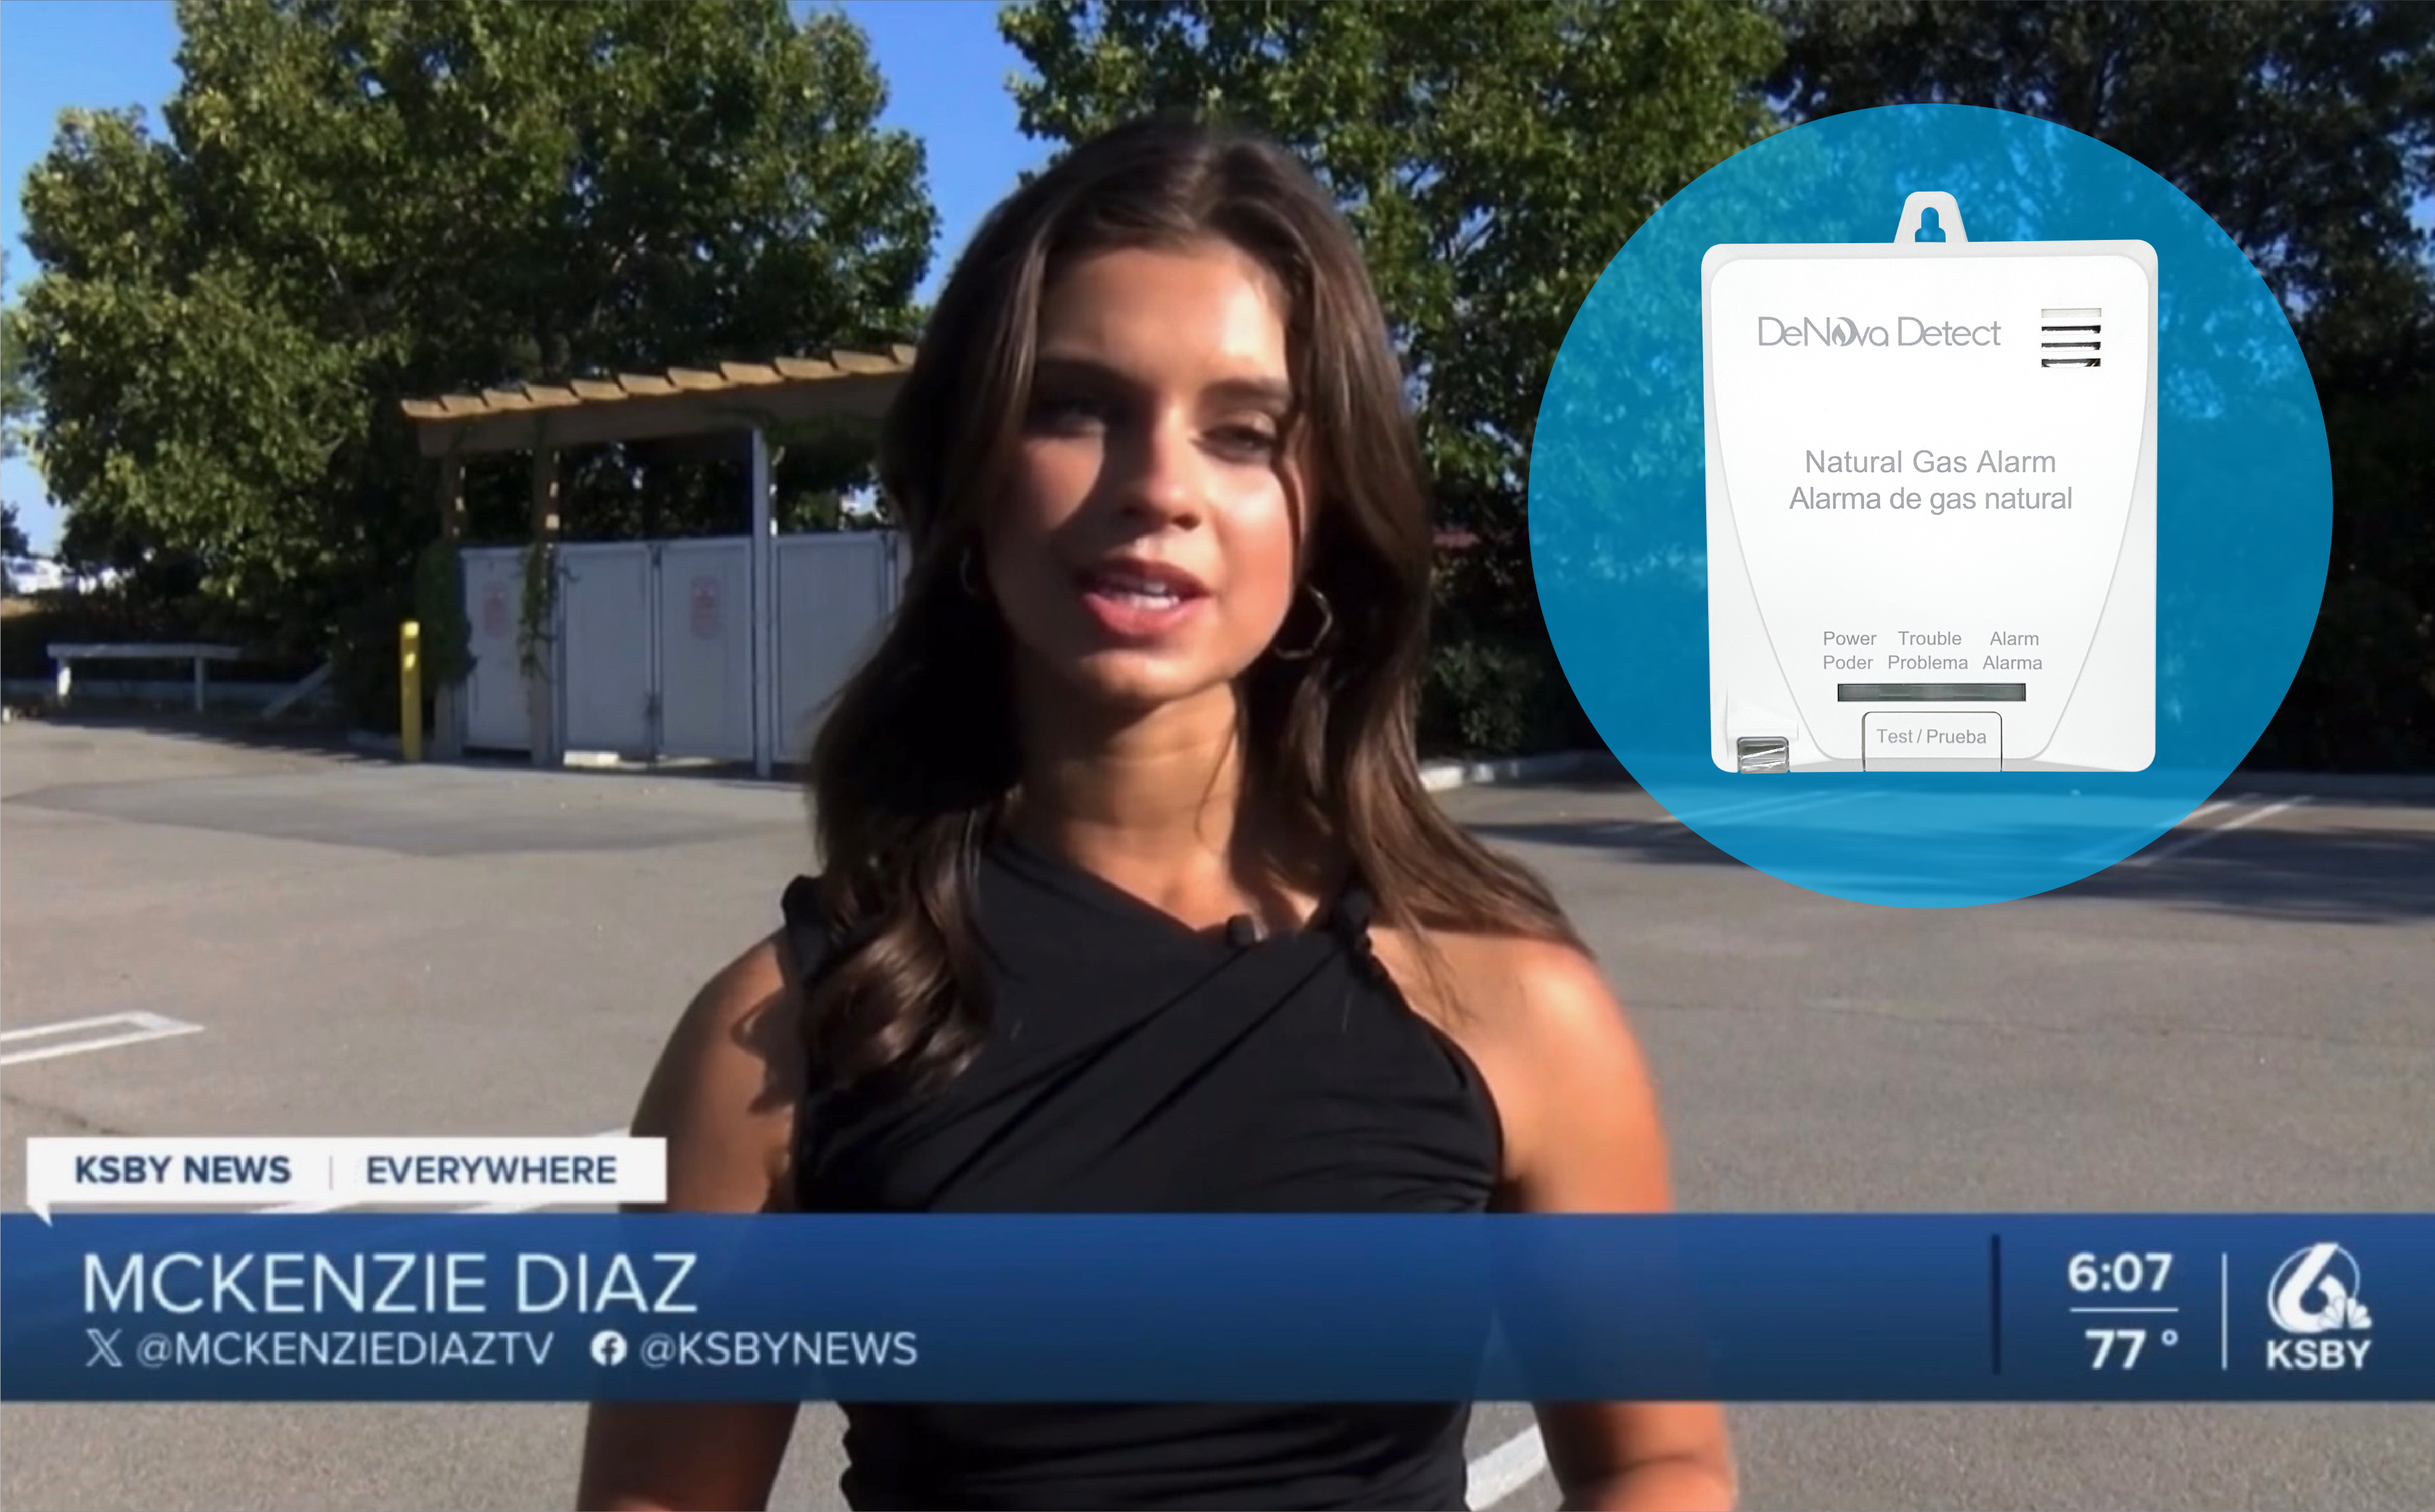 NBC KSBY News Covers Natural Gas Safety with DeNova Detect